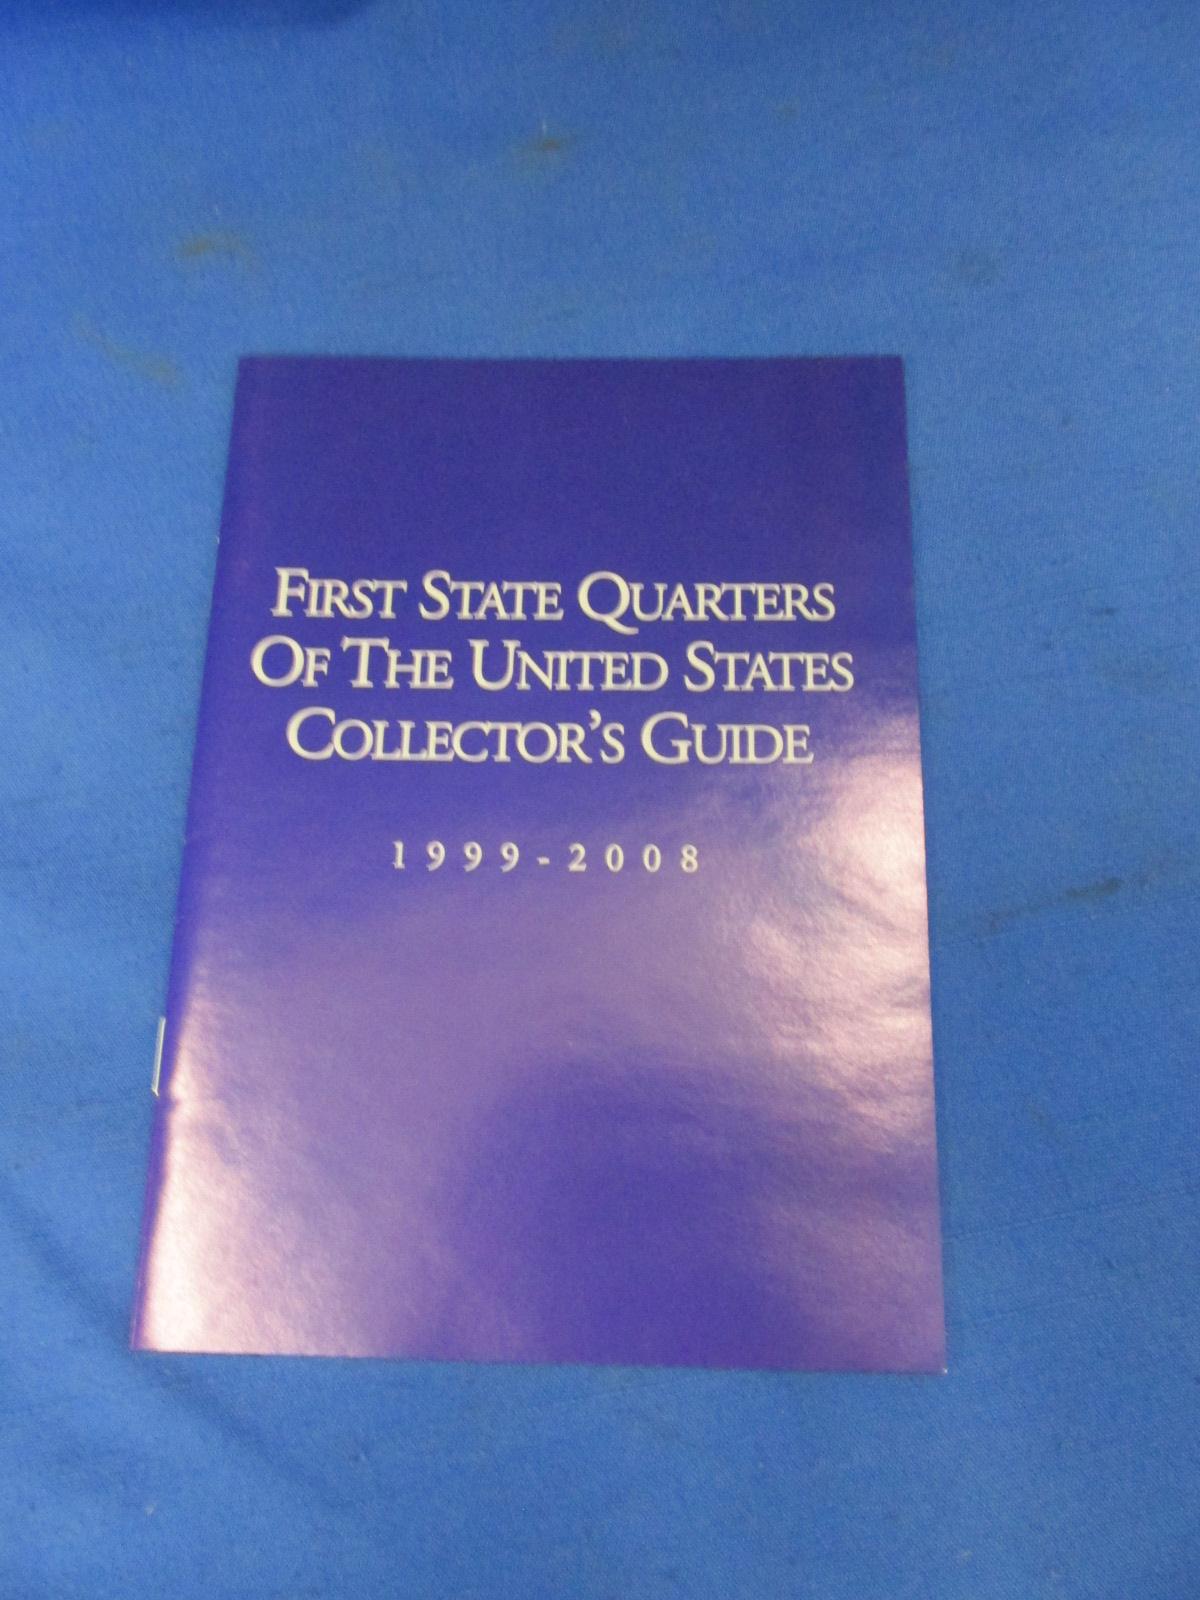 Large Collector Map (In Box) 17”H x 28” For 1999-2008 State Quarters “No Quarters Included” -